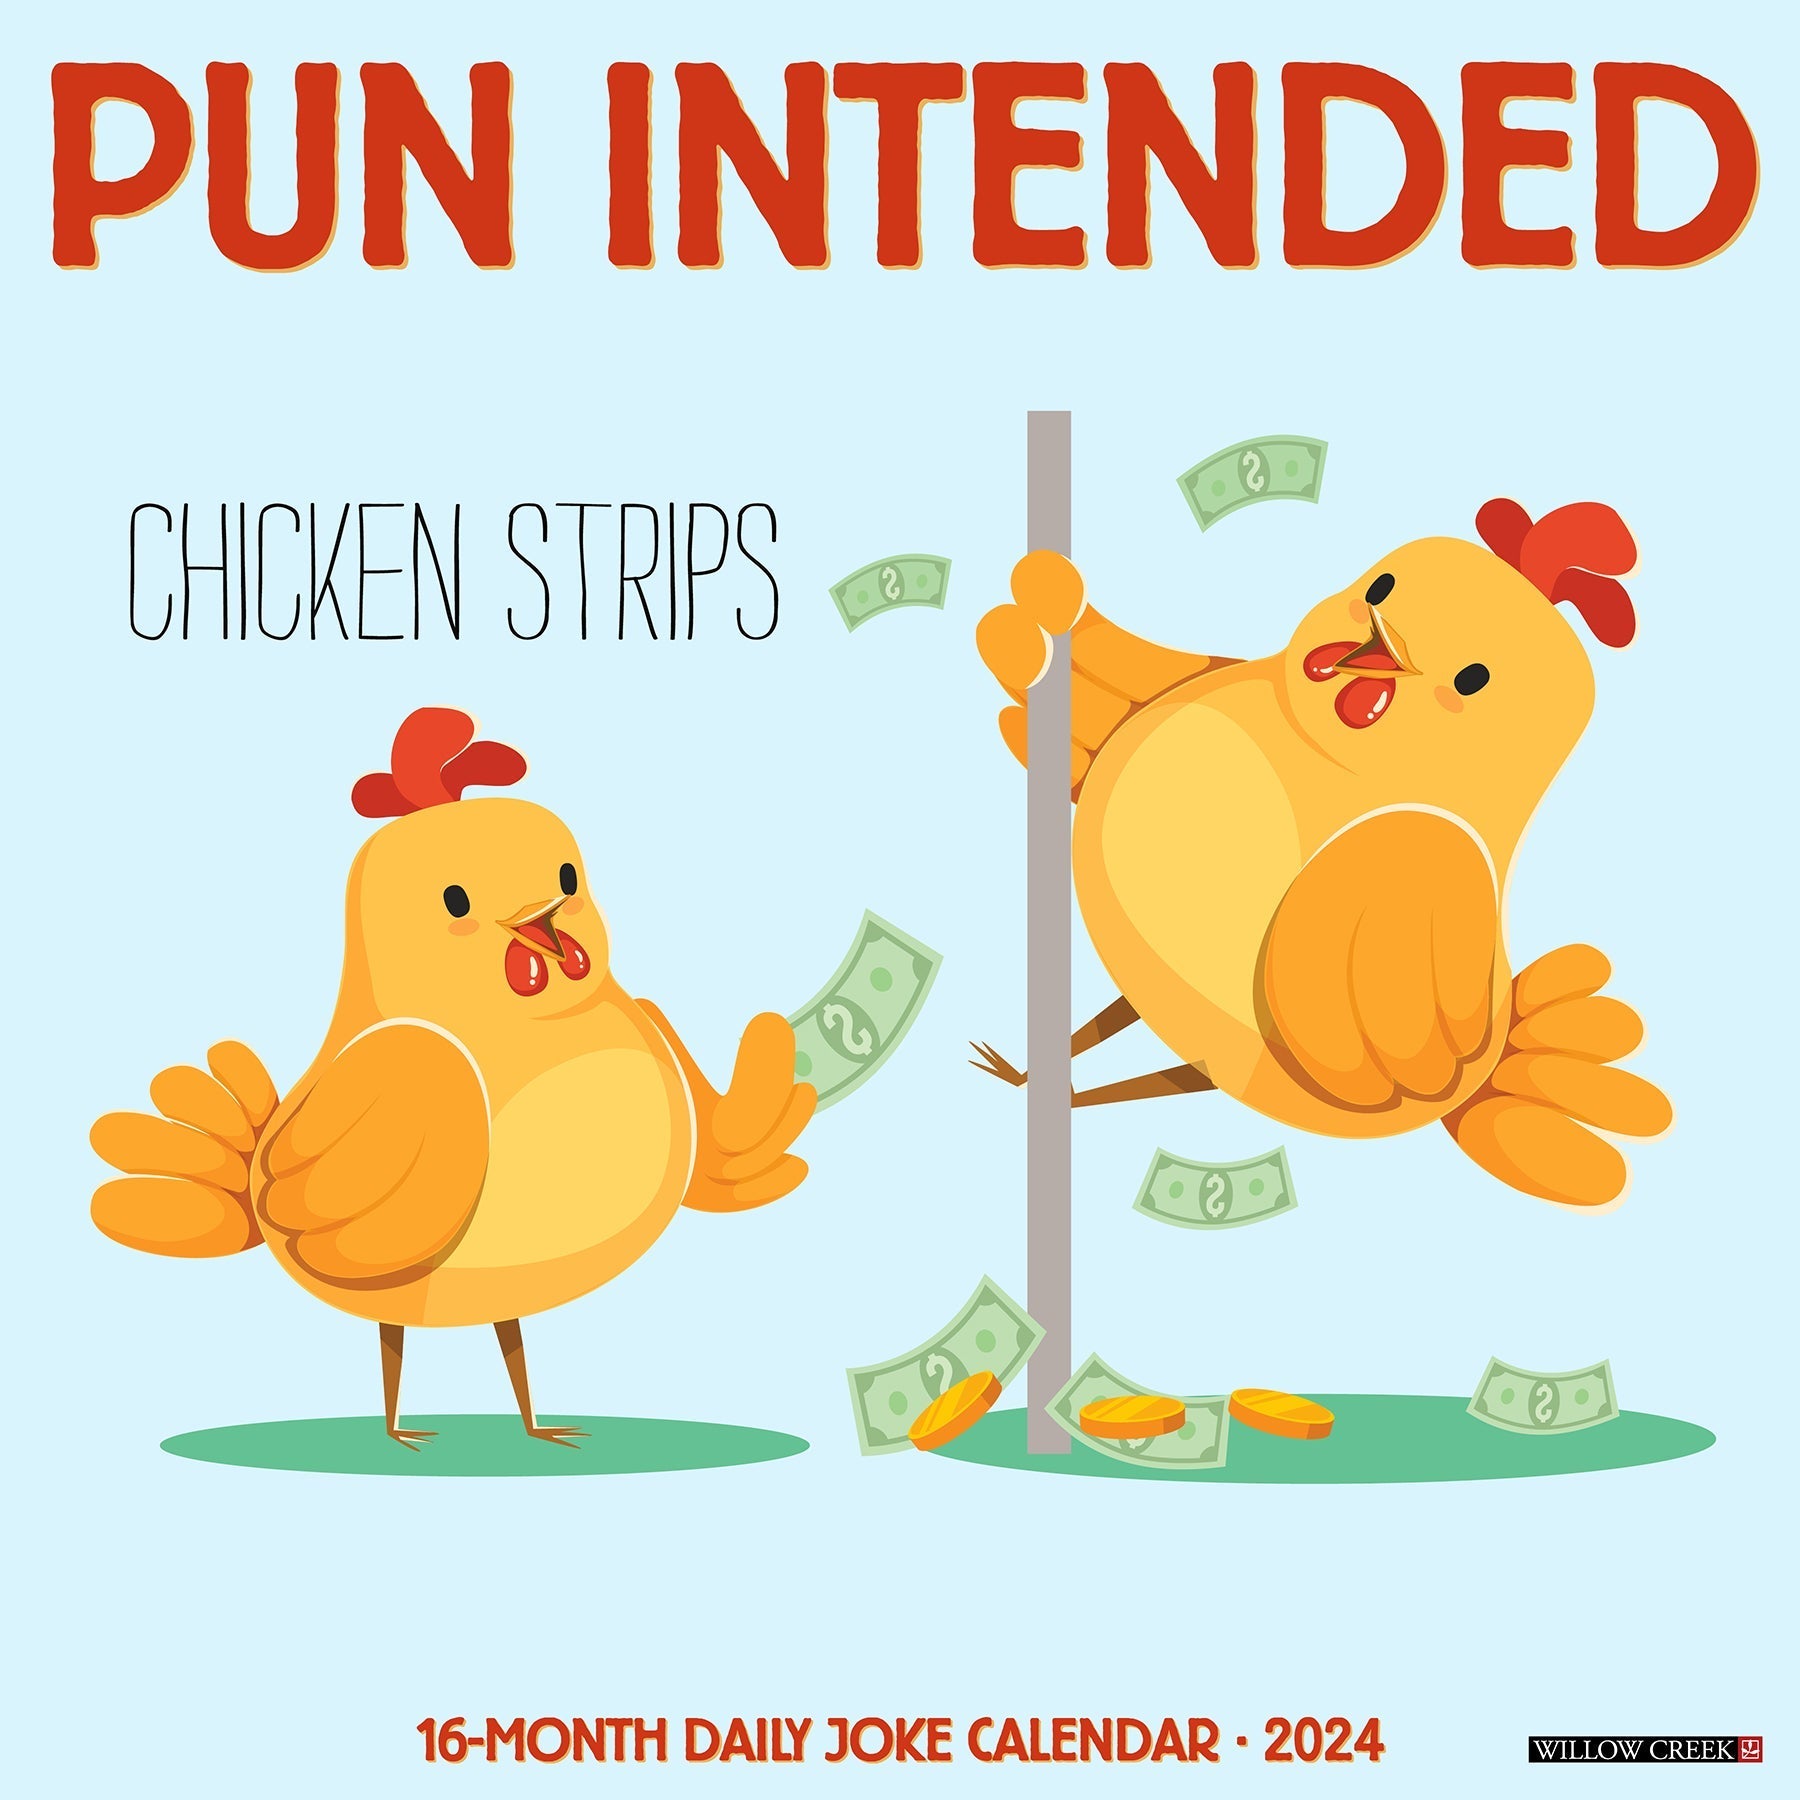 2024 Pun Intended - Square Wall Calendar US